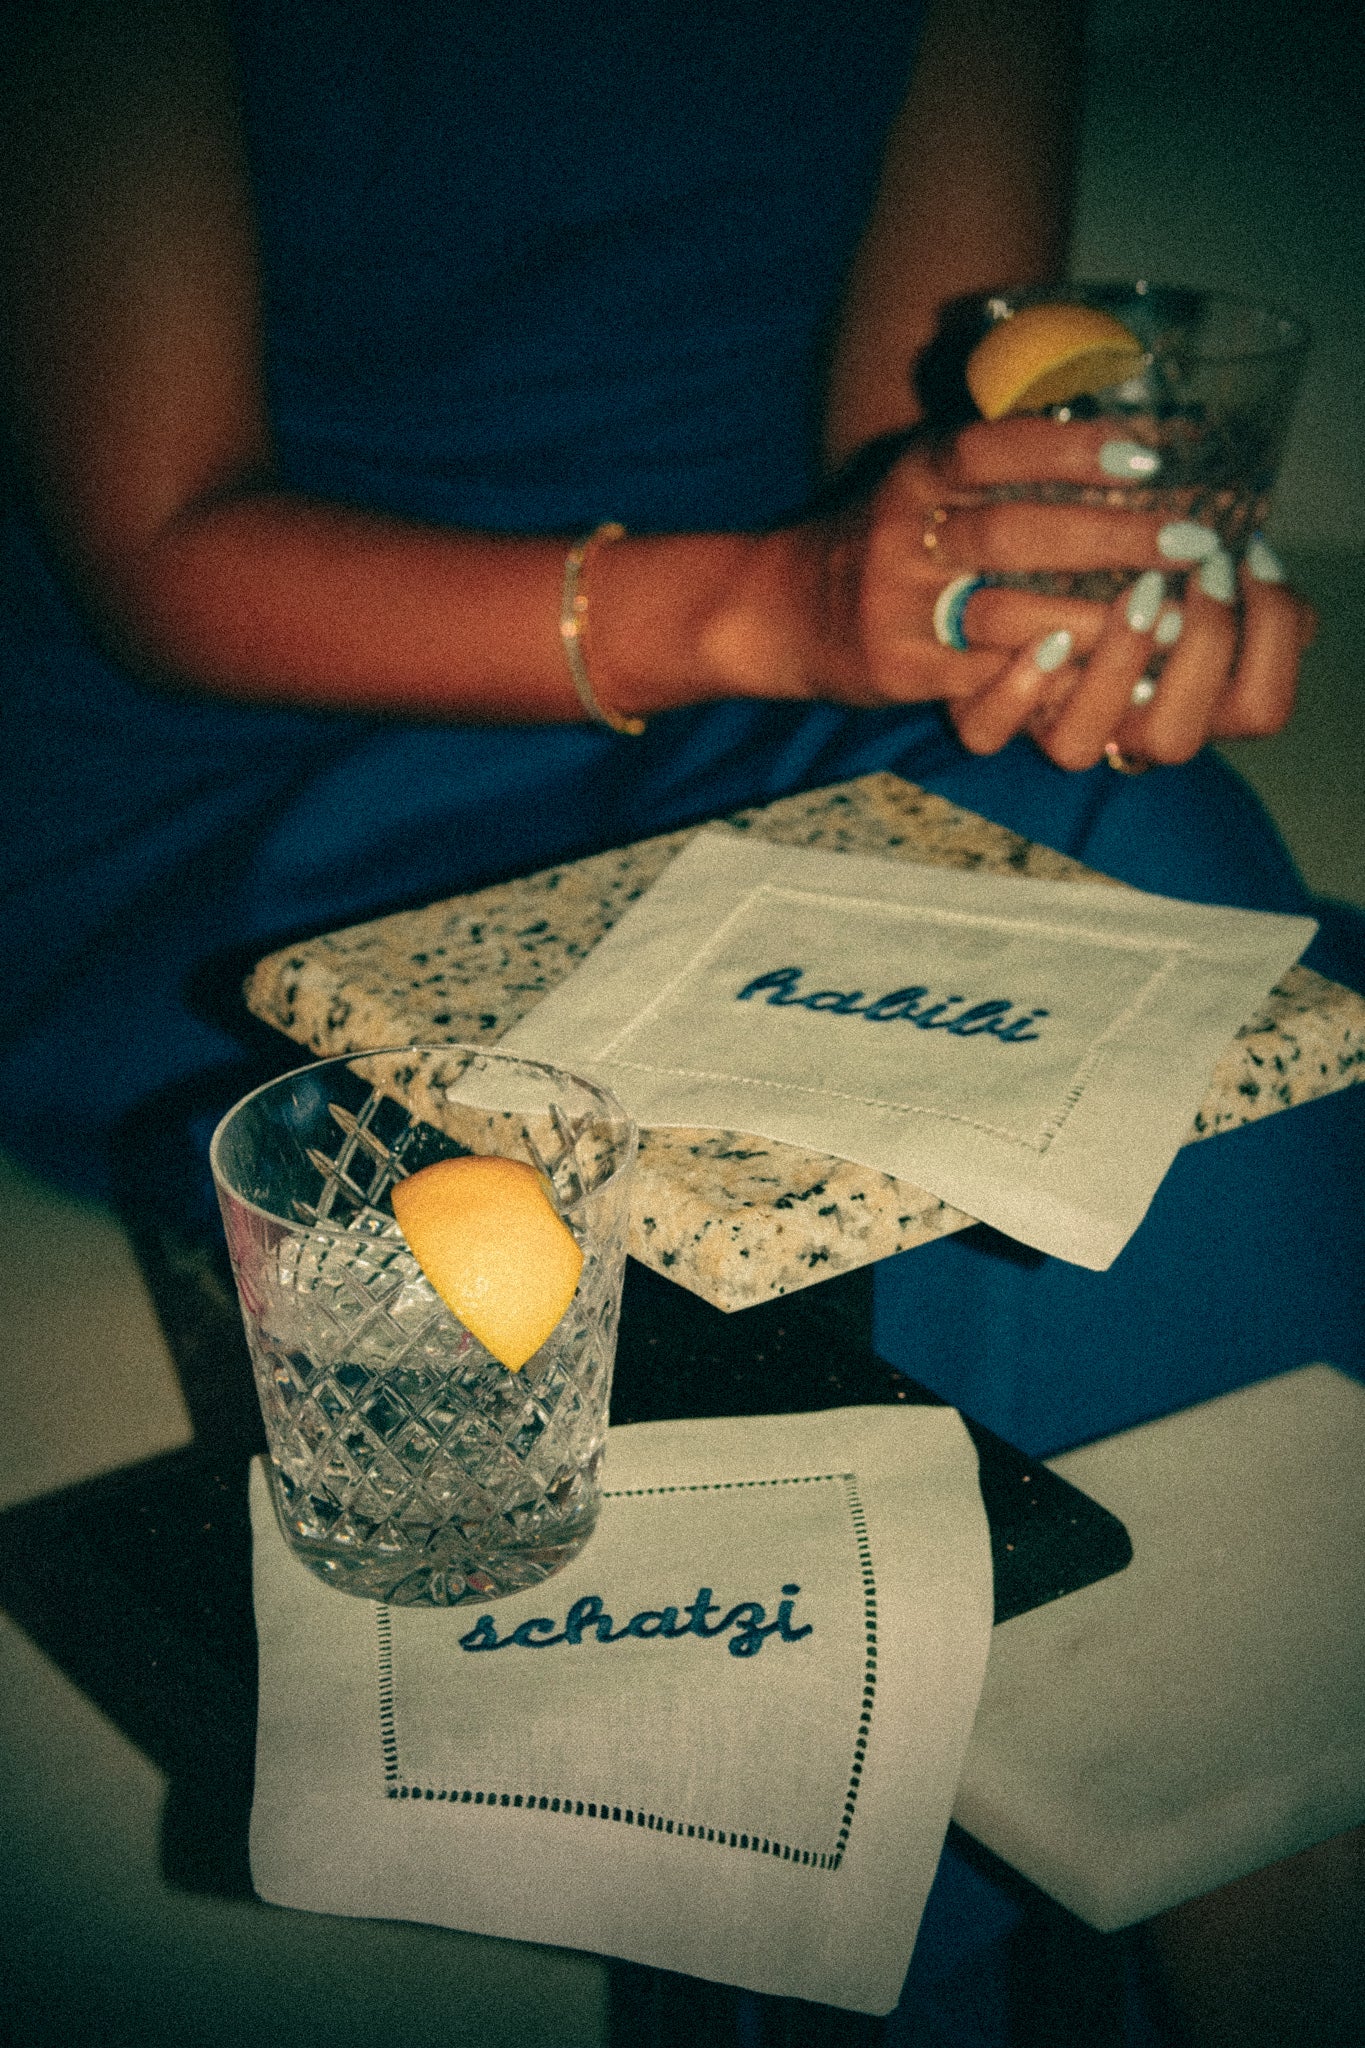 DARLING COCKTAIL COASTERS